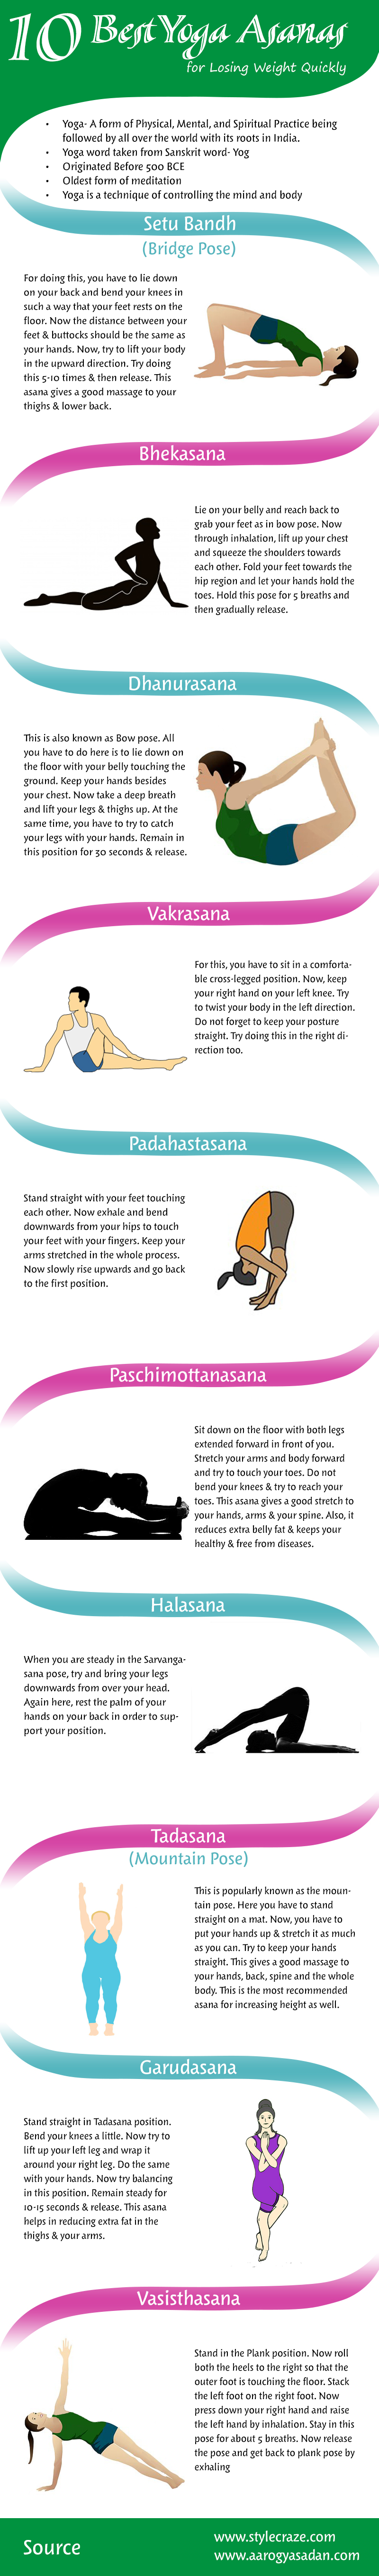 Which direction is best for doing yoga? - Quora